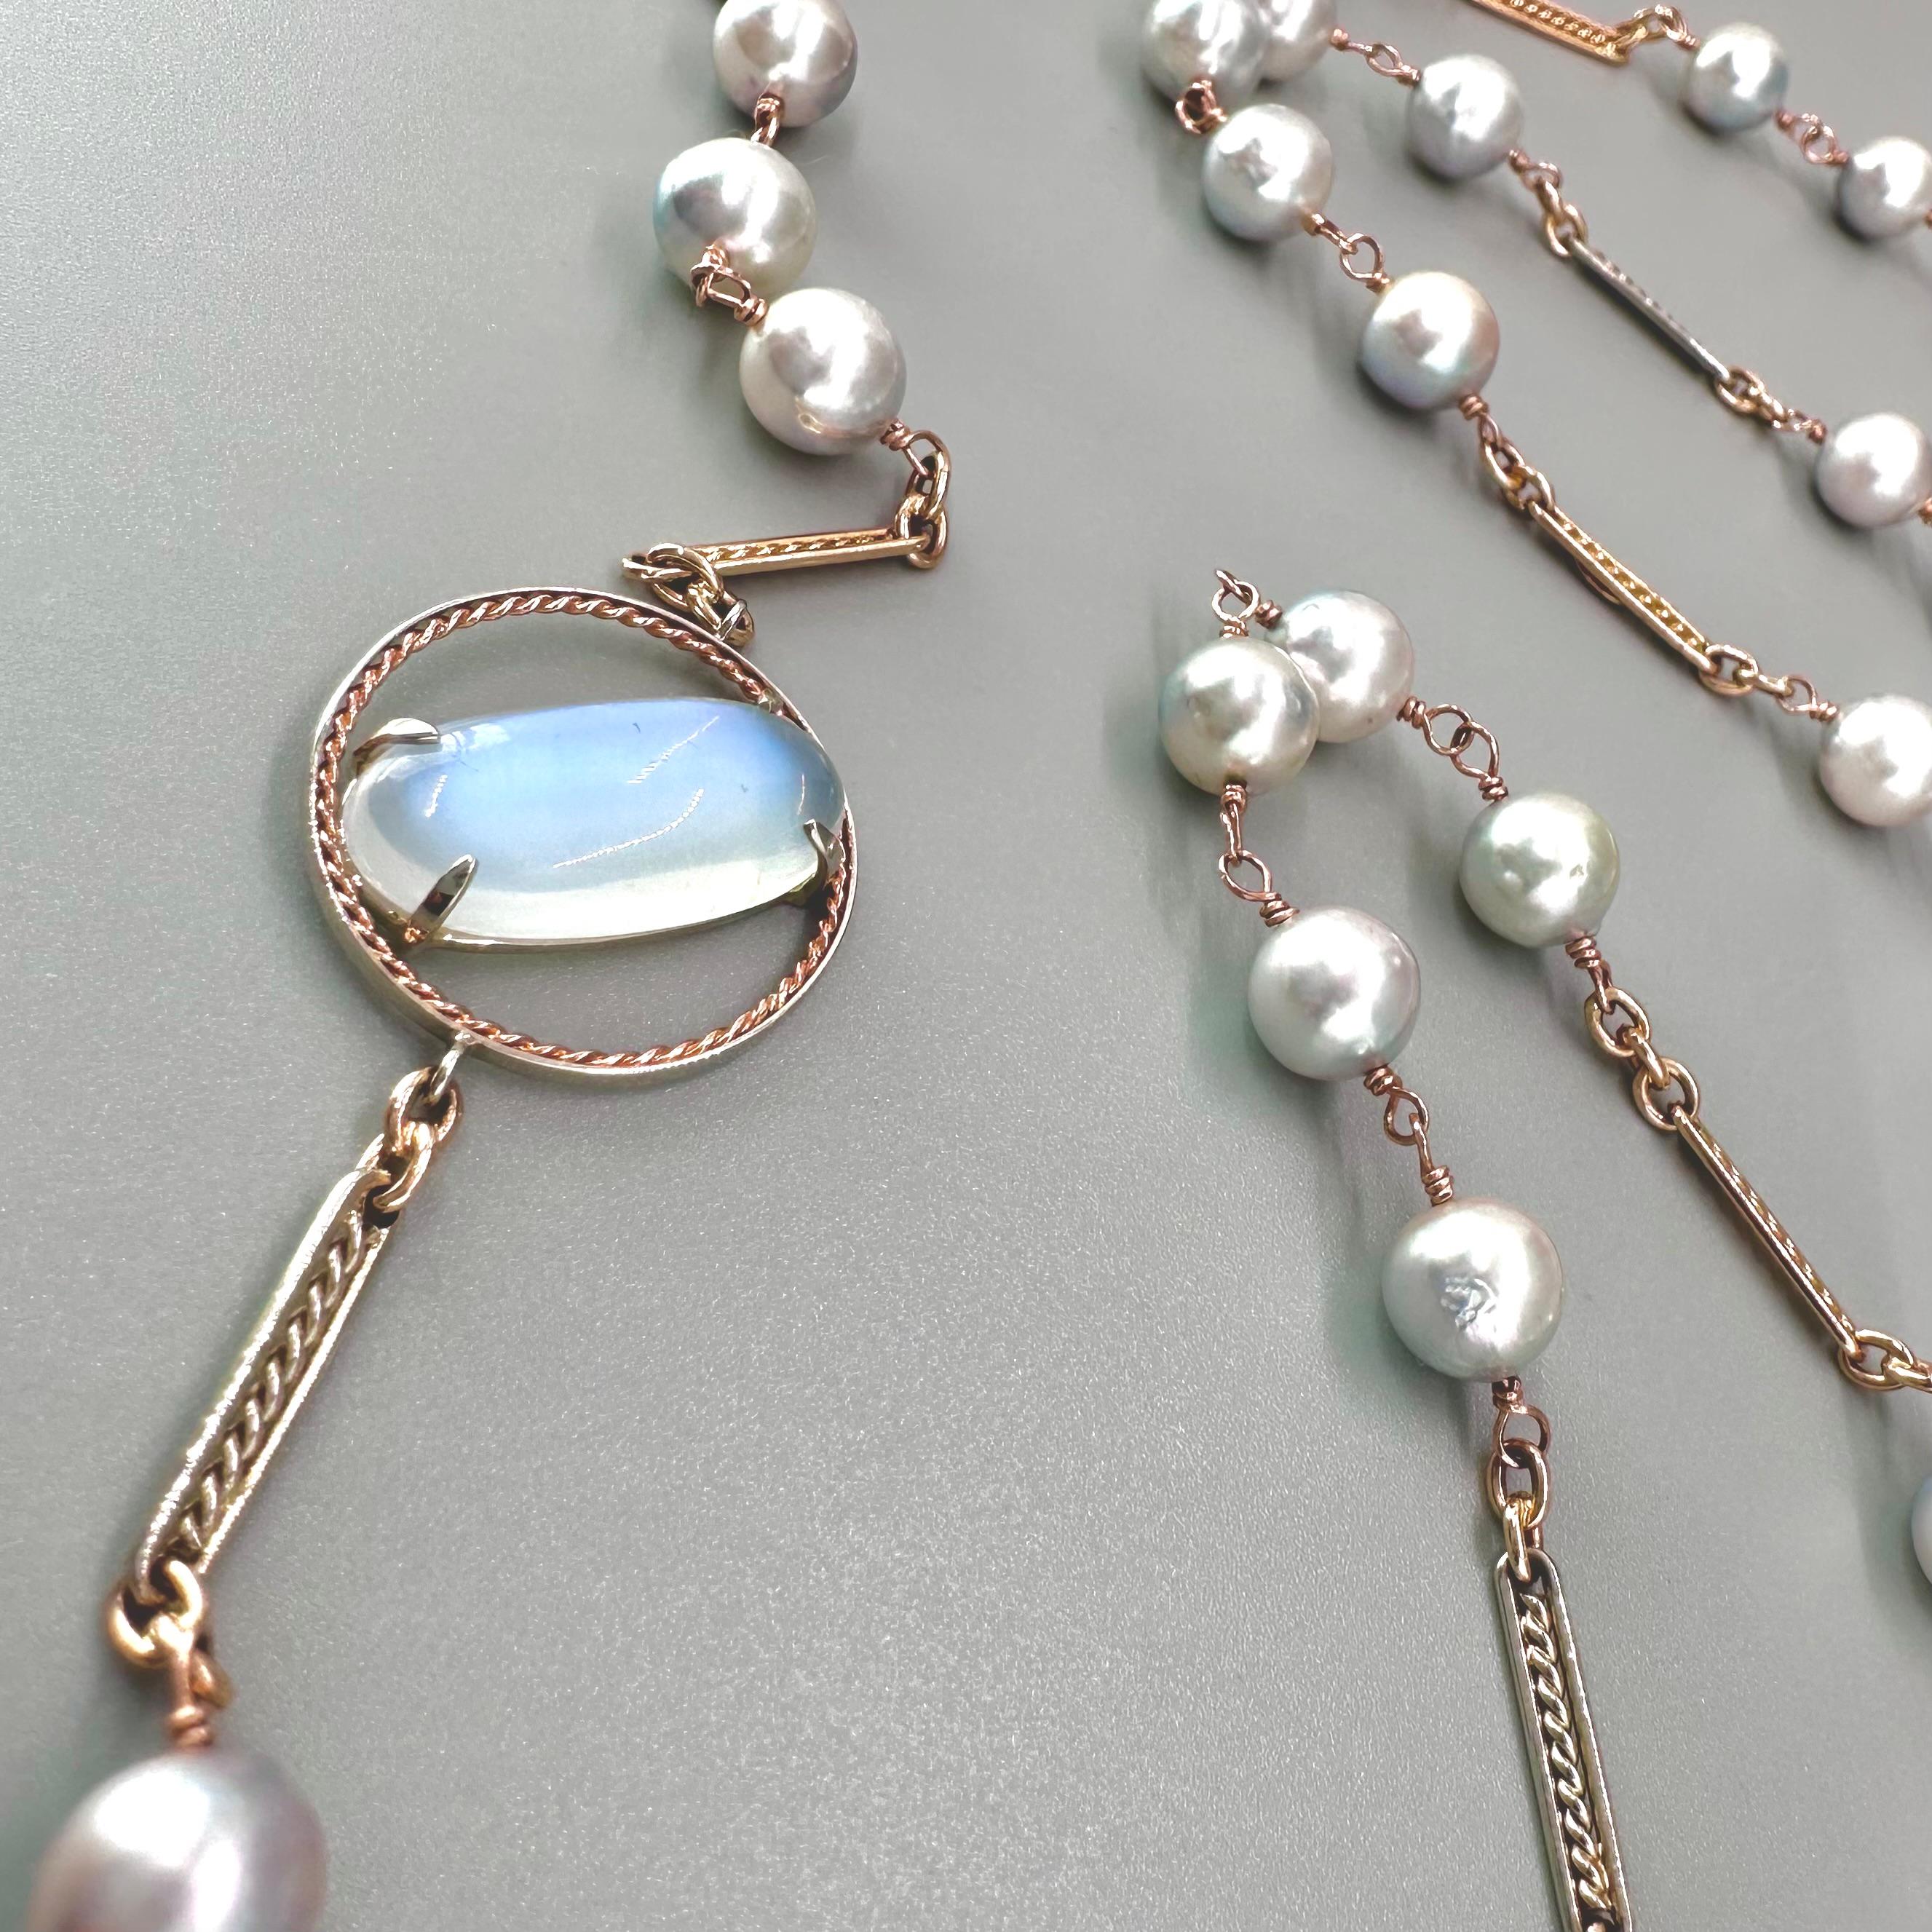 Oval Cut 6.61 carat blue moonstone, Akoya pearls on a handmade 14k necklace by G&G Studio For Sale